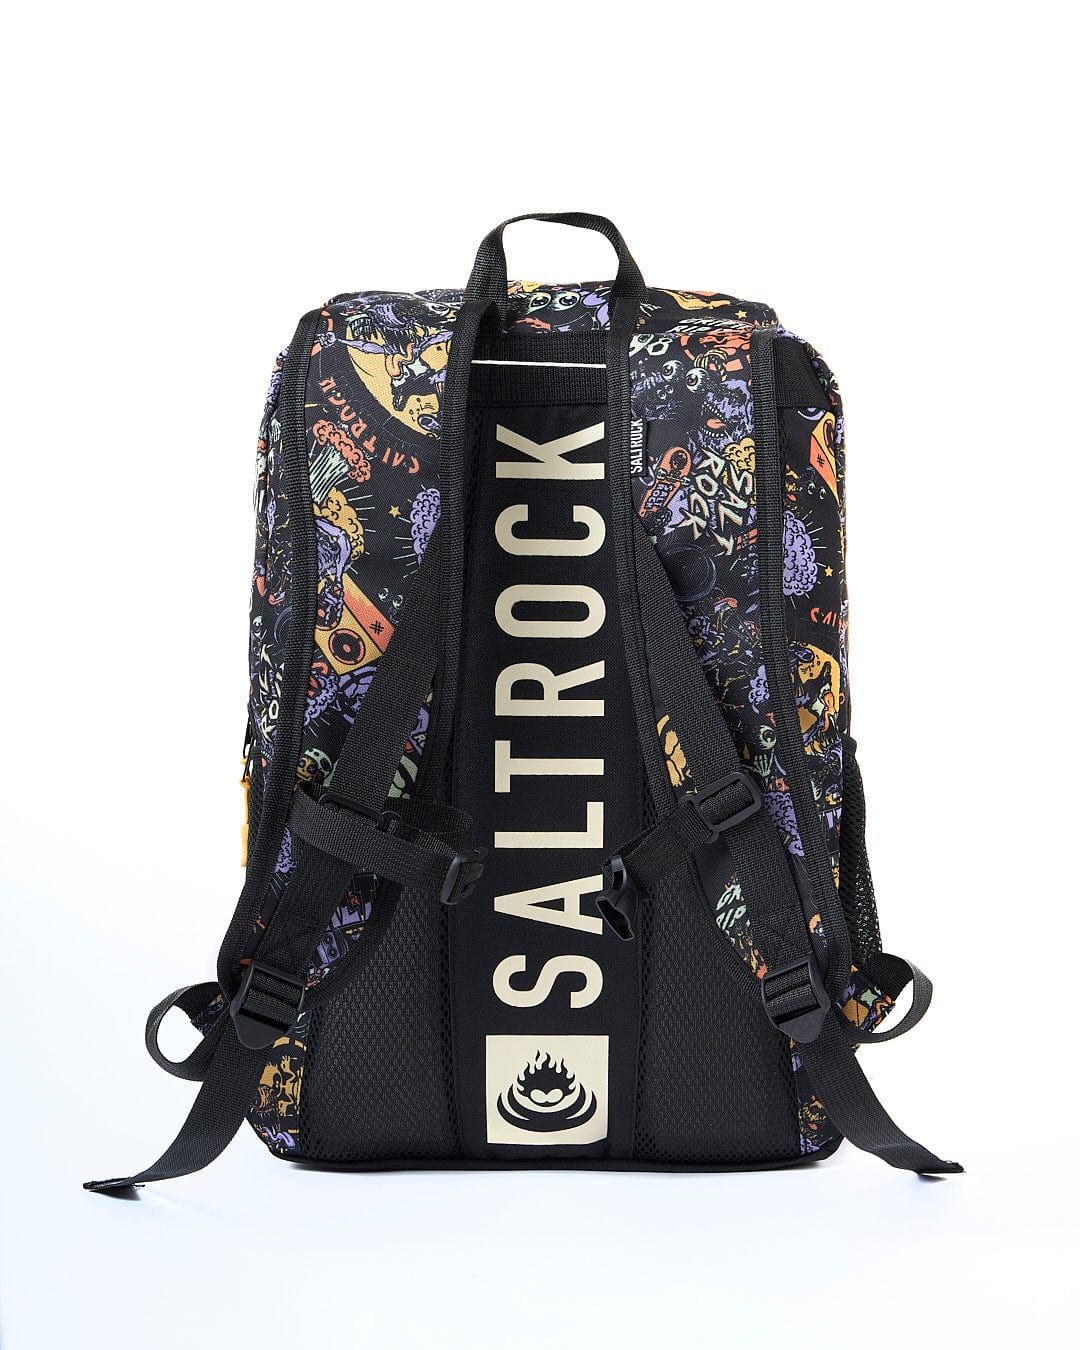 A Creeper Crew - Skatepack - Black backpack with the Saltrock brand name on it.